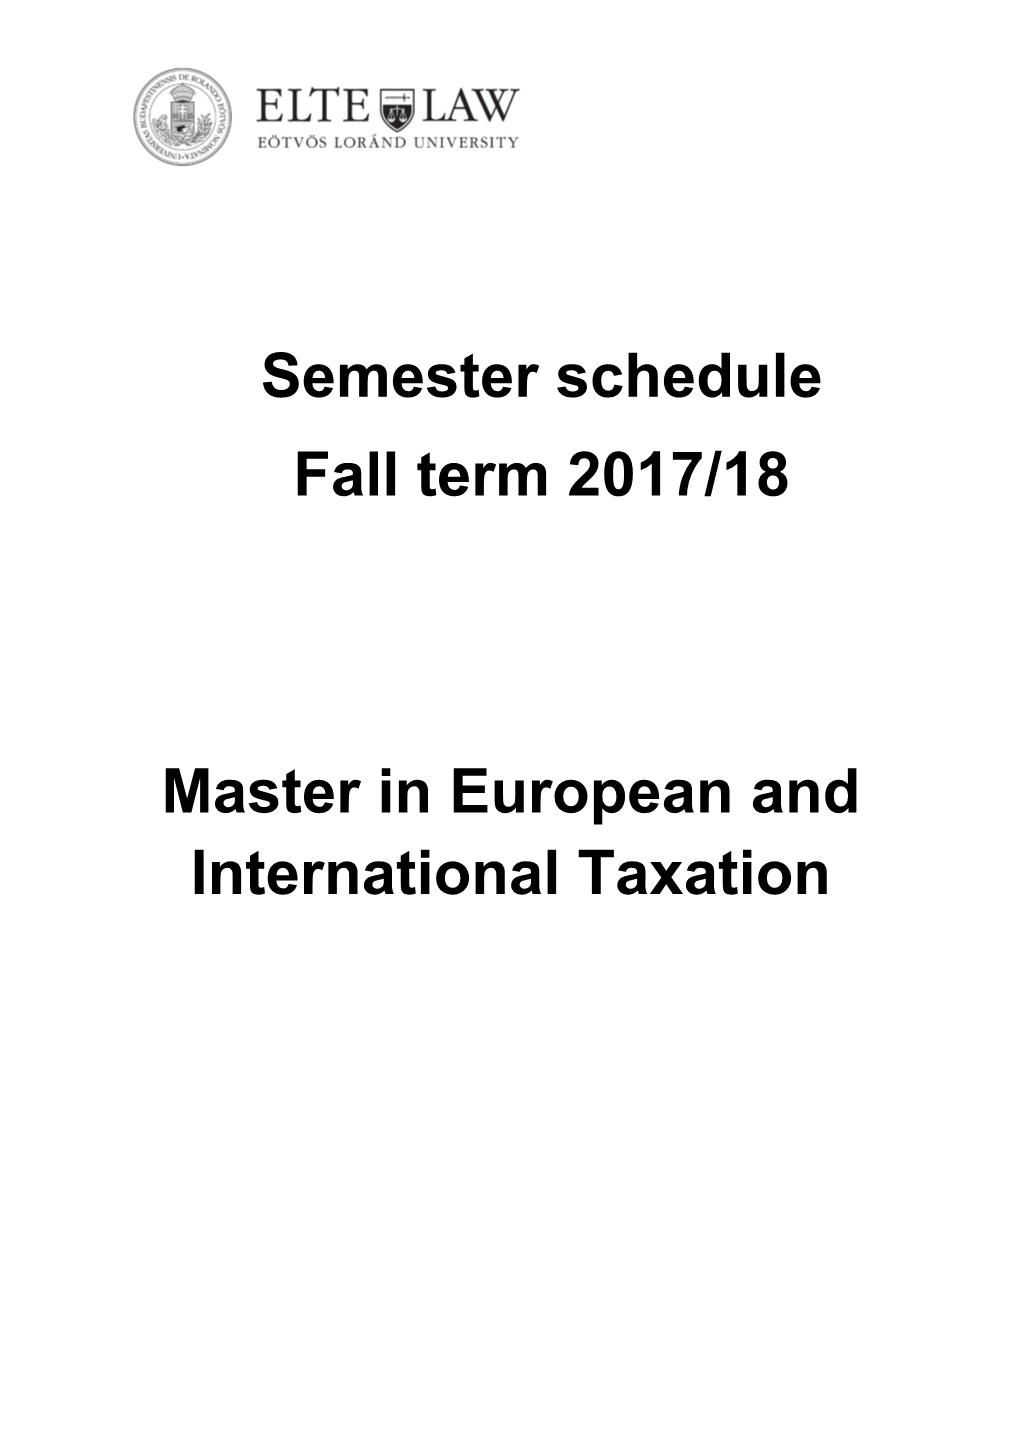 Master in European and International Taxation